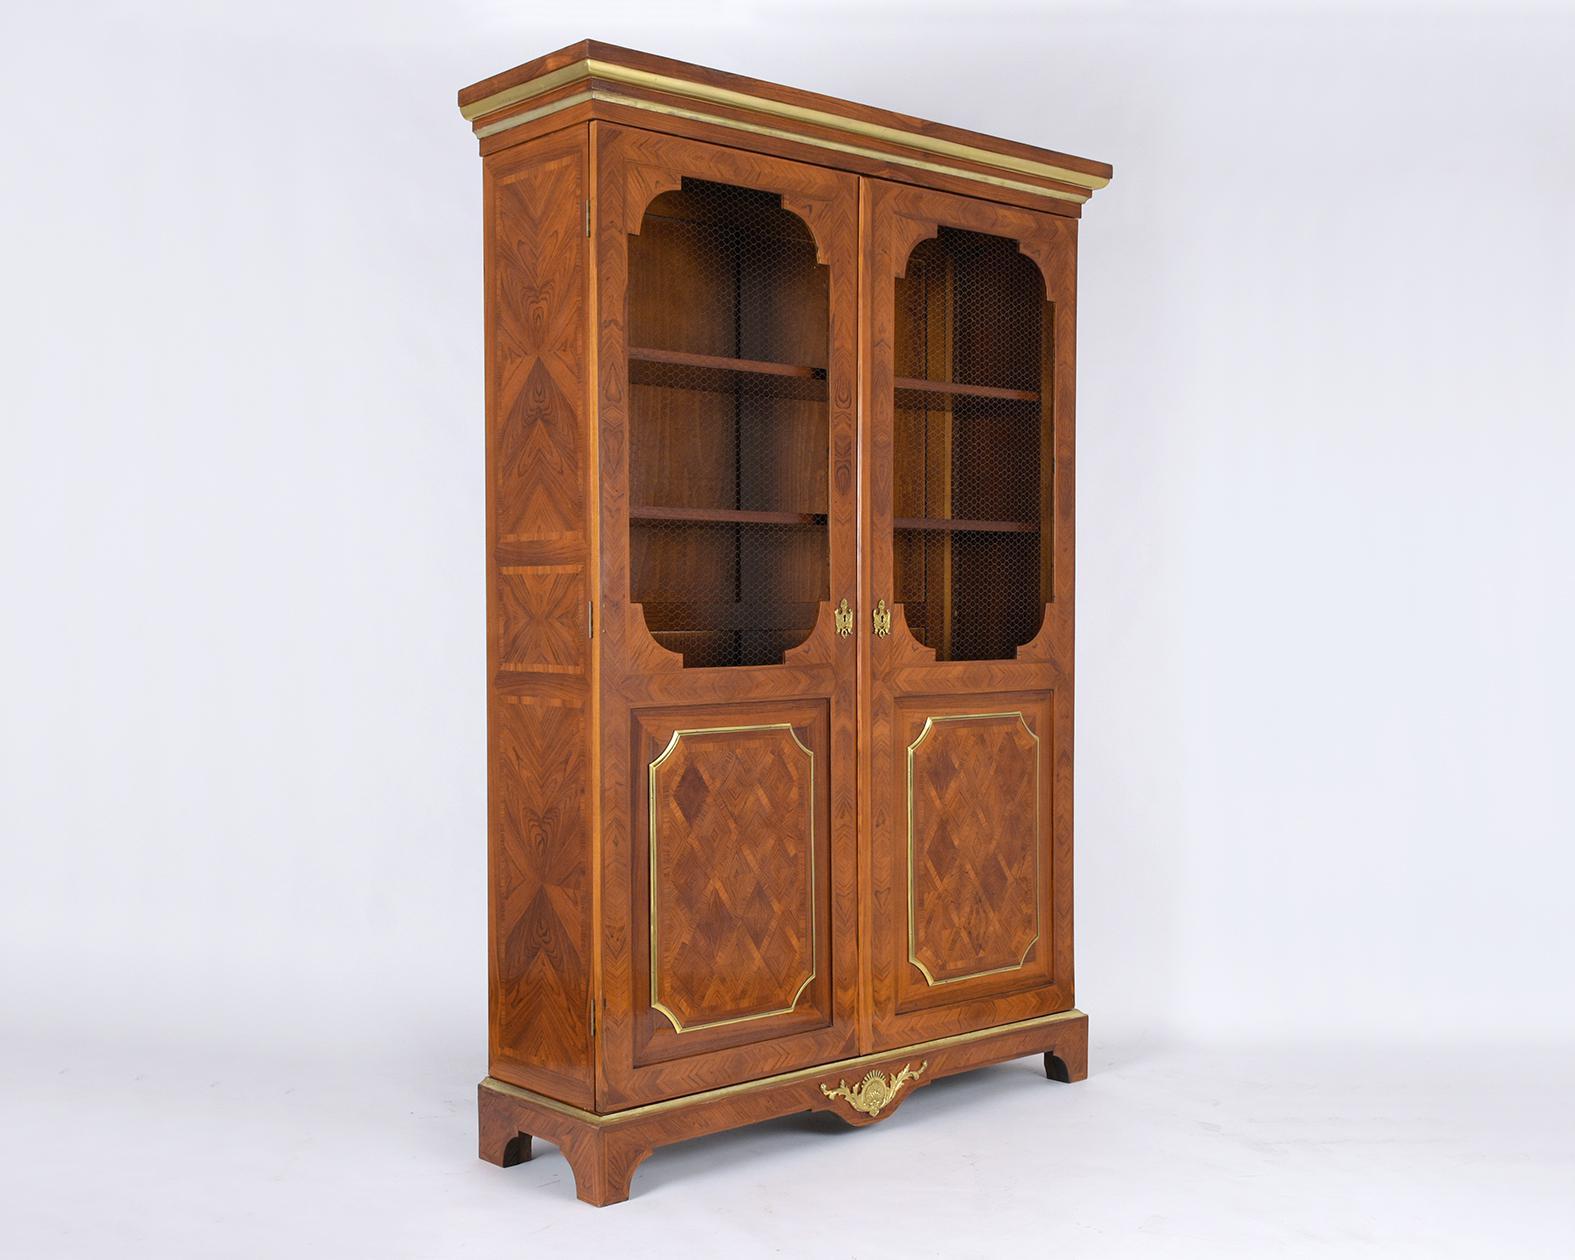 Step back into the grandeur of the 1900s with our antique French Louis XVI-style walnut bookcase, a masterpiece showcasing the pinnacle of traditional craftsmanship. Handcrafted with care and precision, this vintage piece is made from the finest